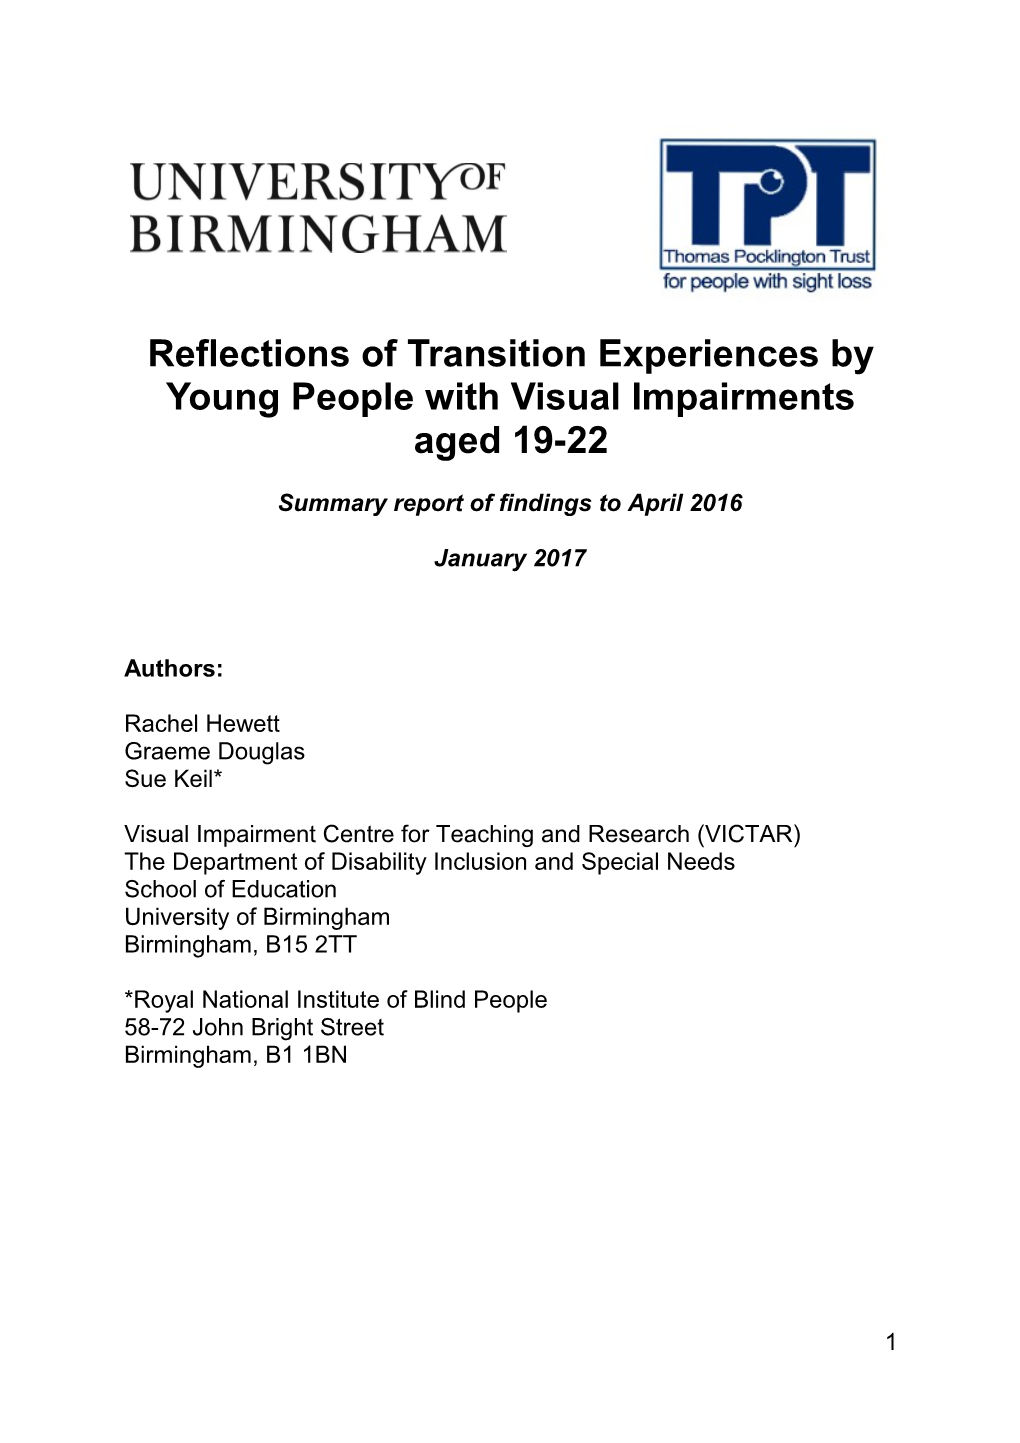 Reflections of Transition Experiences by Young People with Visual Impairments Aged 19-22